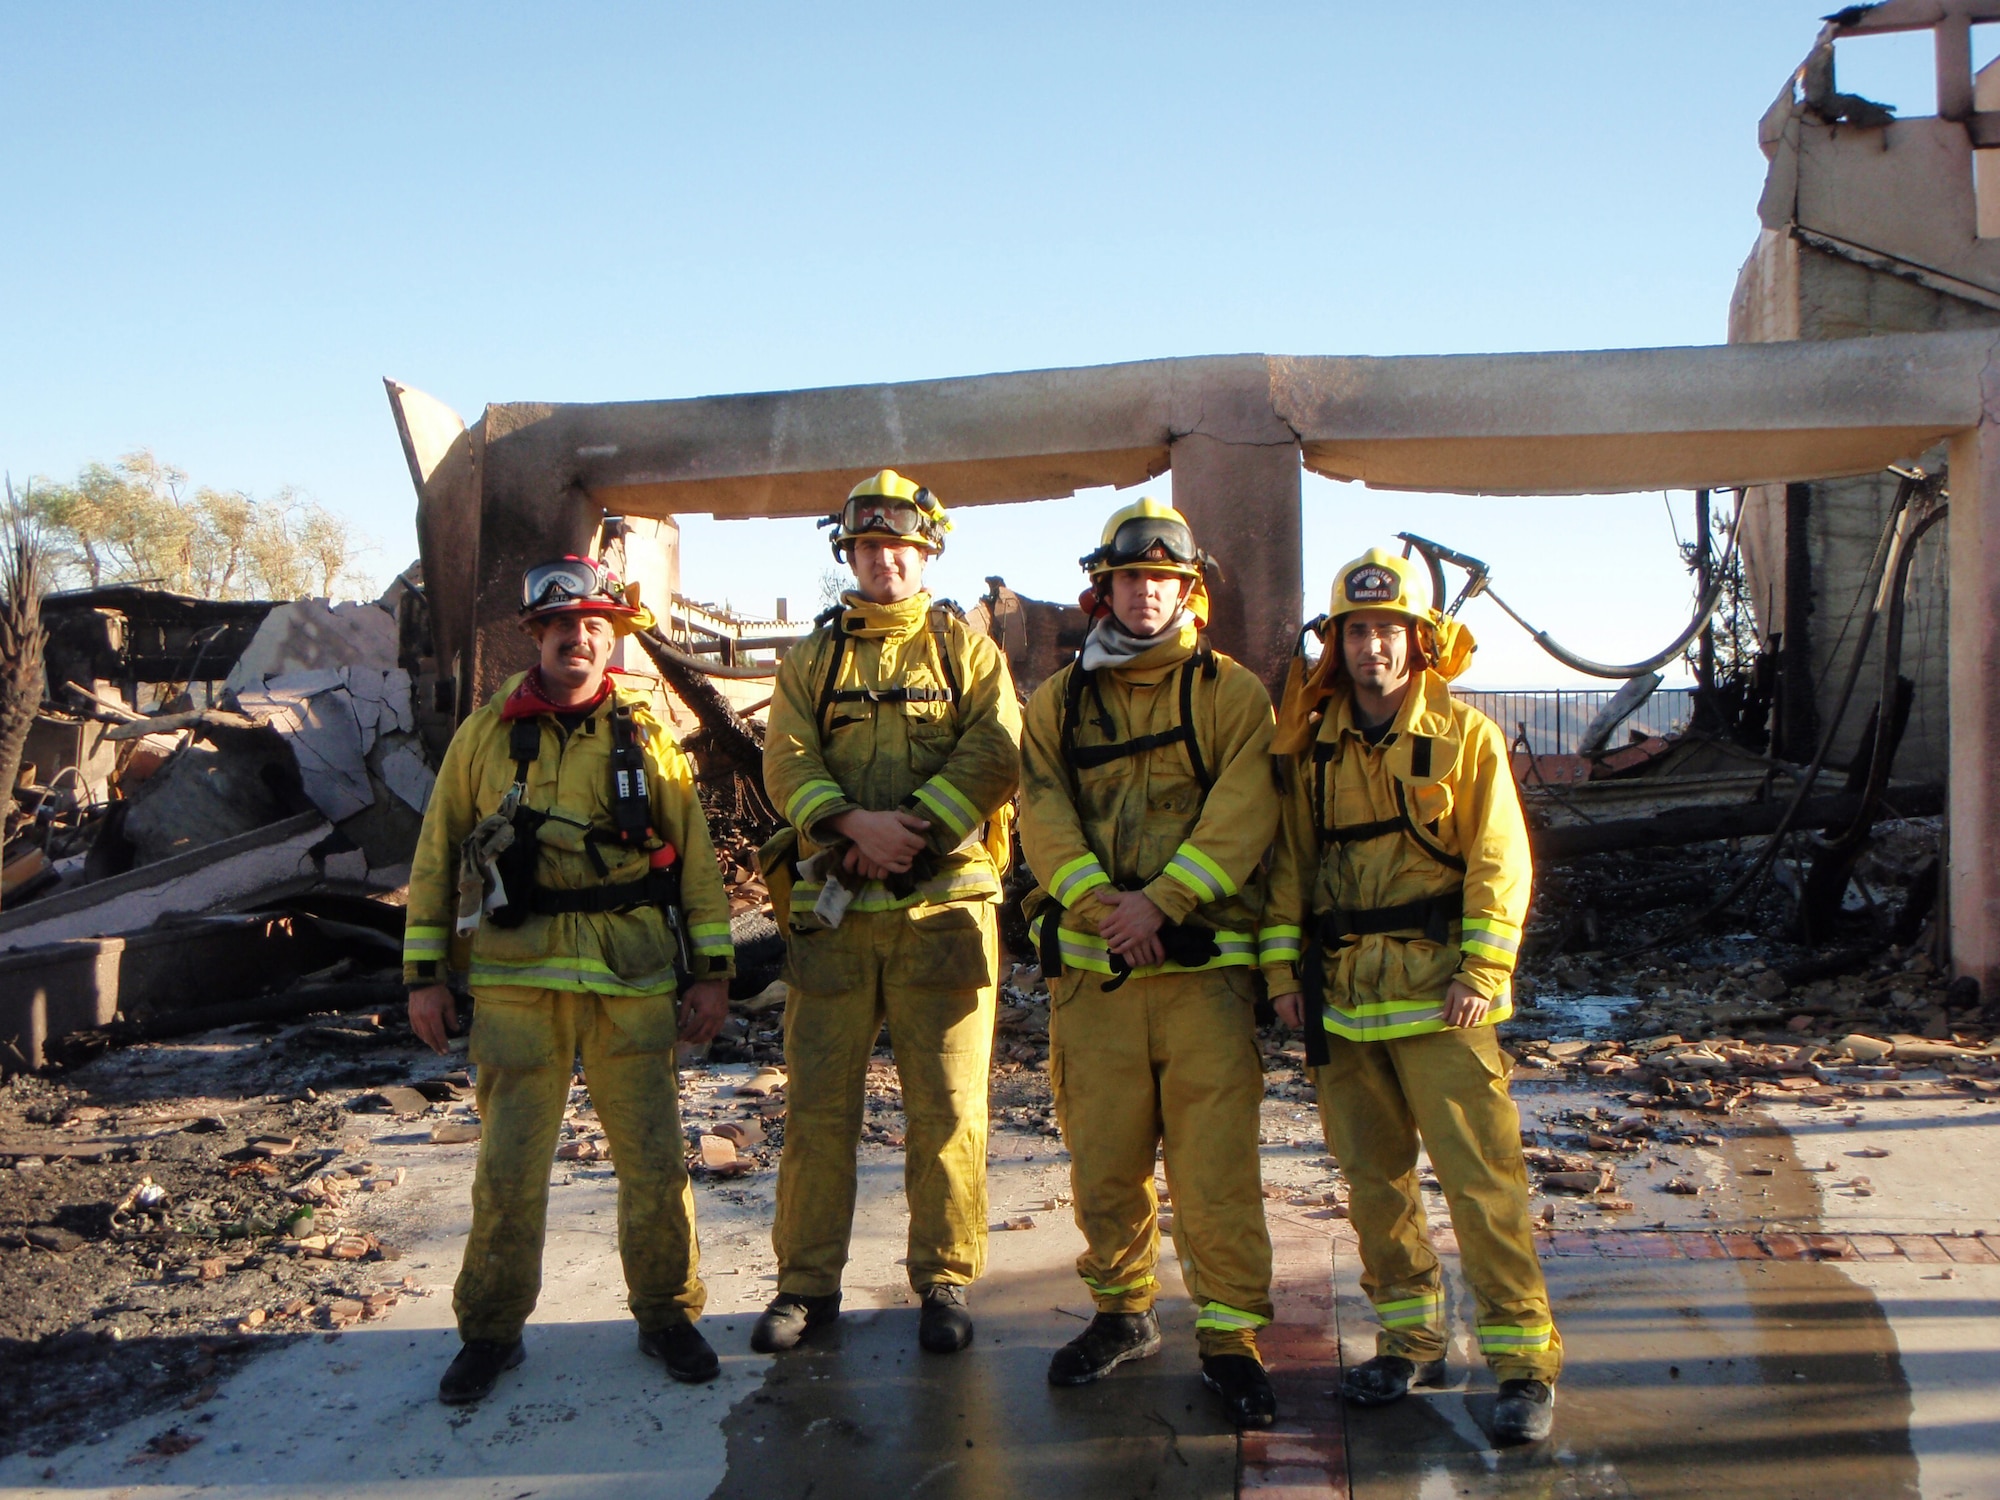 As part of a mutual aid agreement with the local community, March Air Reserve Base (Calif.) Fire Department dispatched one engine and four firemen to support Strike Team 6050A in Riverside County, Calif., Nov. 15, 2008. From left are March ARB's Robert Fox, Michael Goodman, Senior Airman Josh Bauman and Eric Russell. (Courtesy photo)